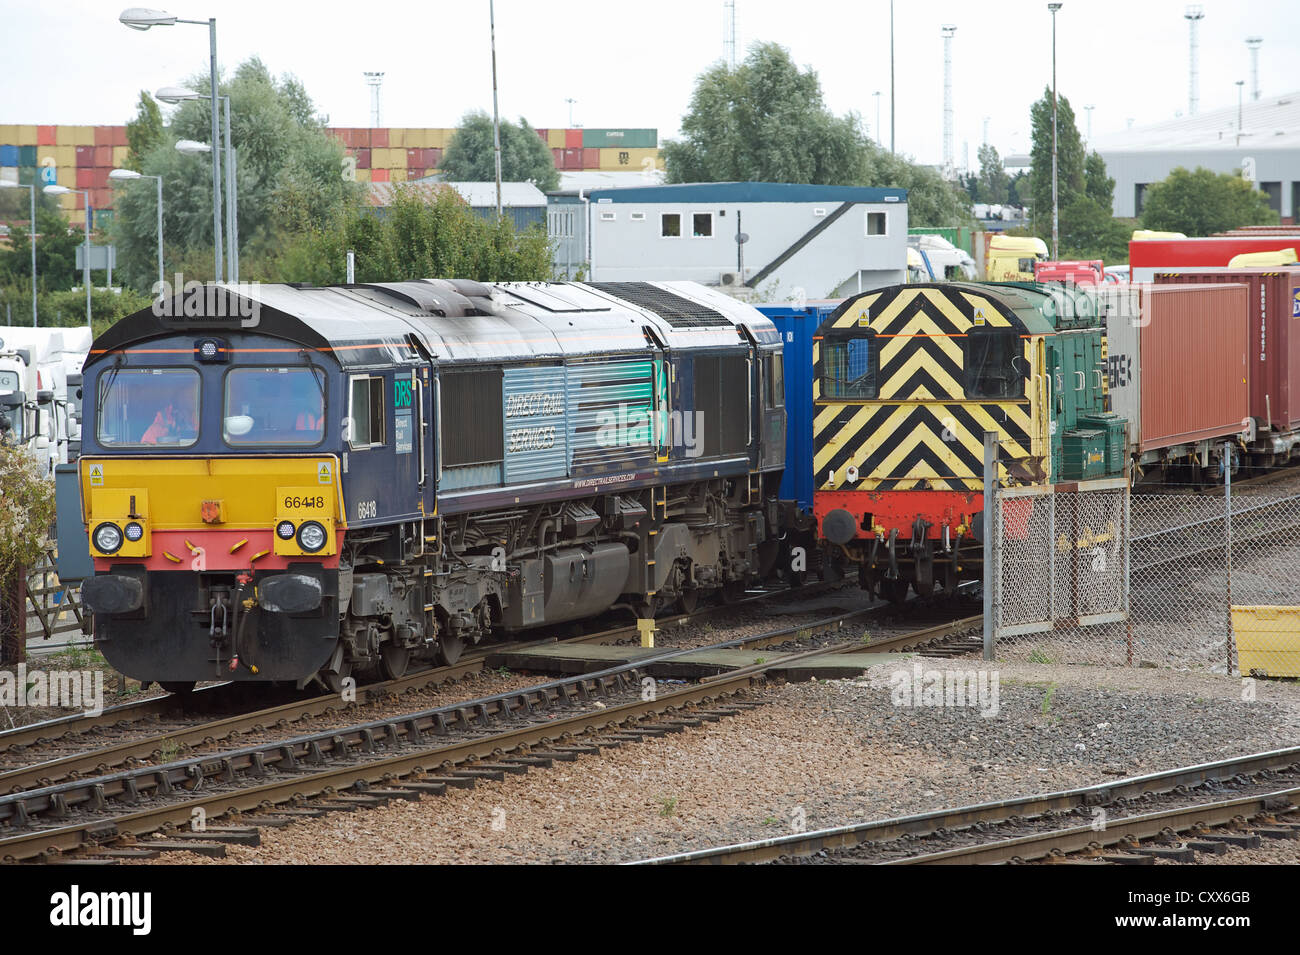 DRS (Direct Rail Services) freight train leaving the North rail terminal, Port of Felixstowe, Suffolk, UK. Stock Photo